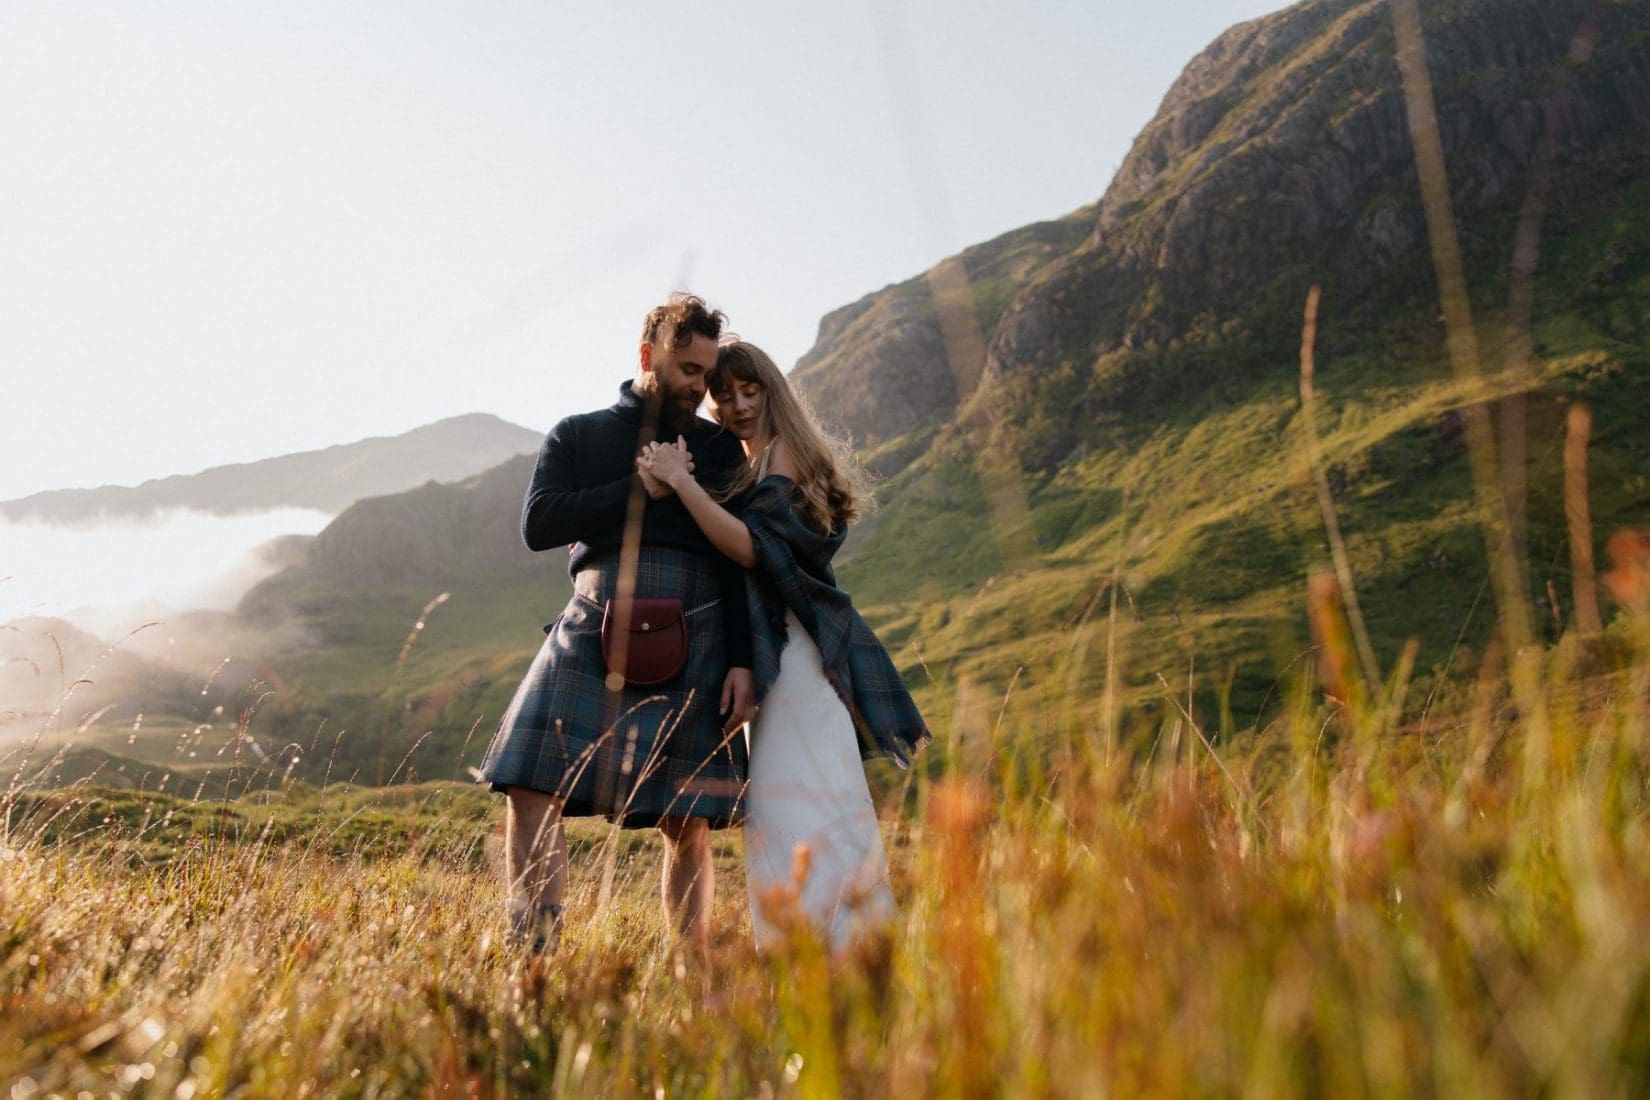 A scaled Editorial: A Sporran Fit for a Highland Elopement